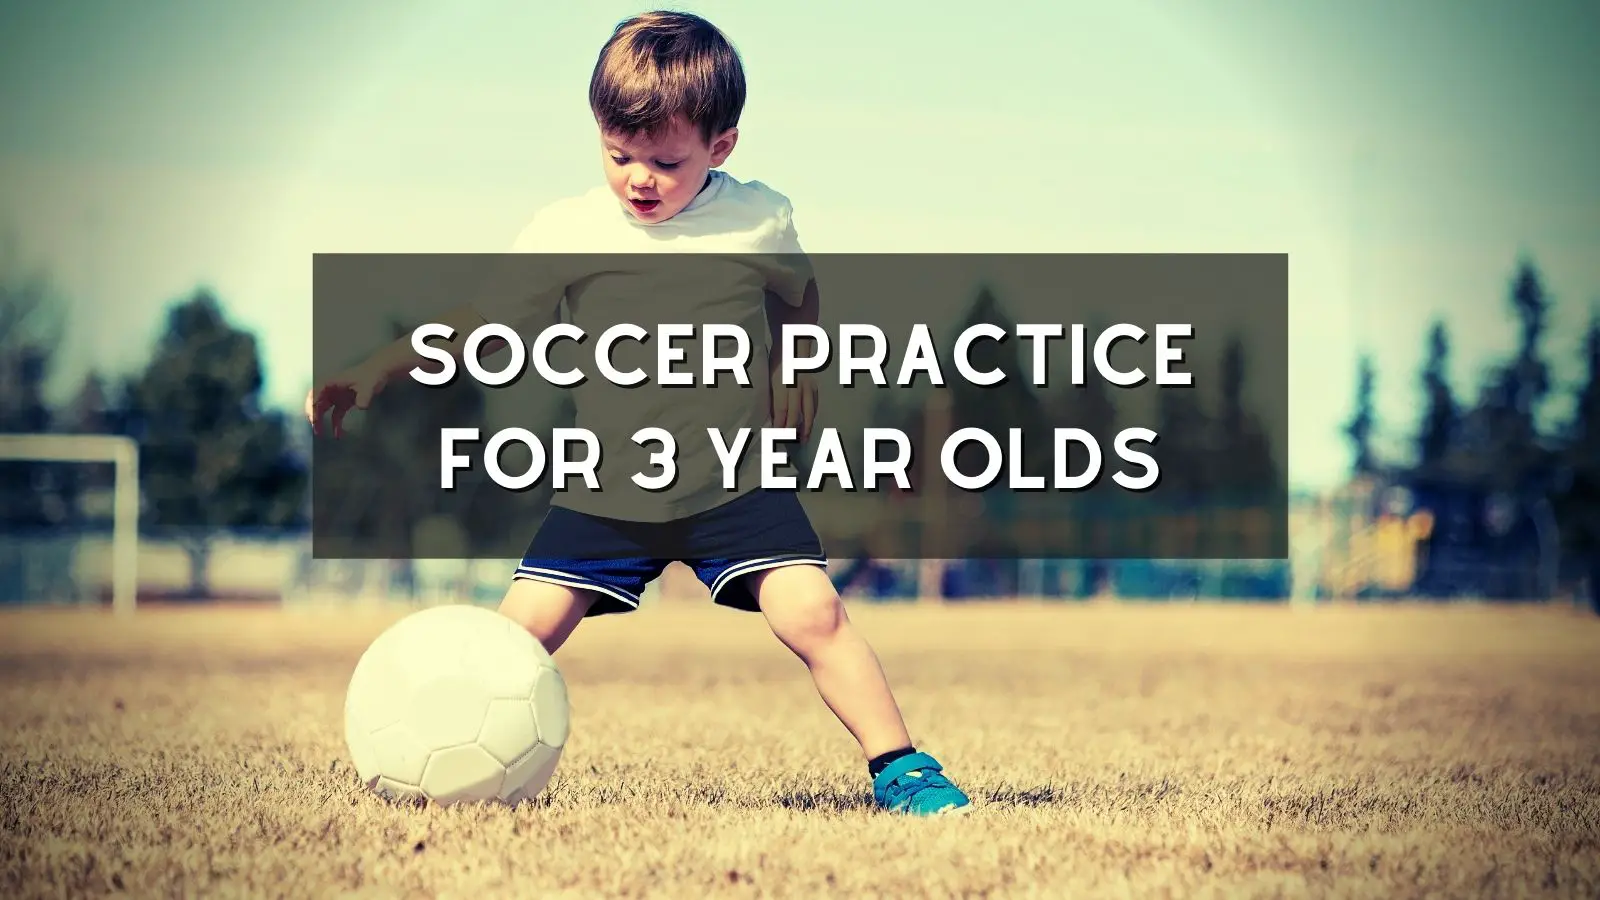 Soccer Practice for 3 Year Olds